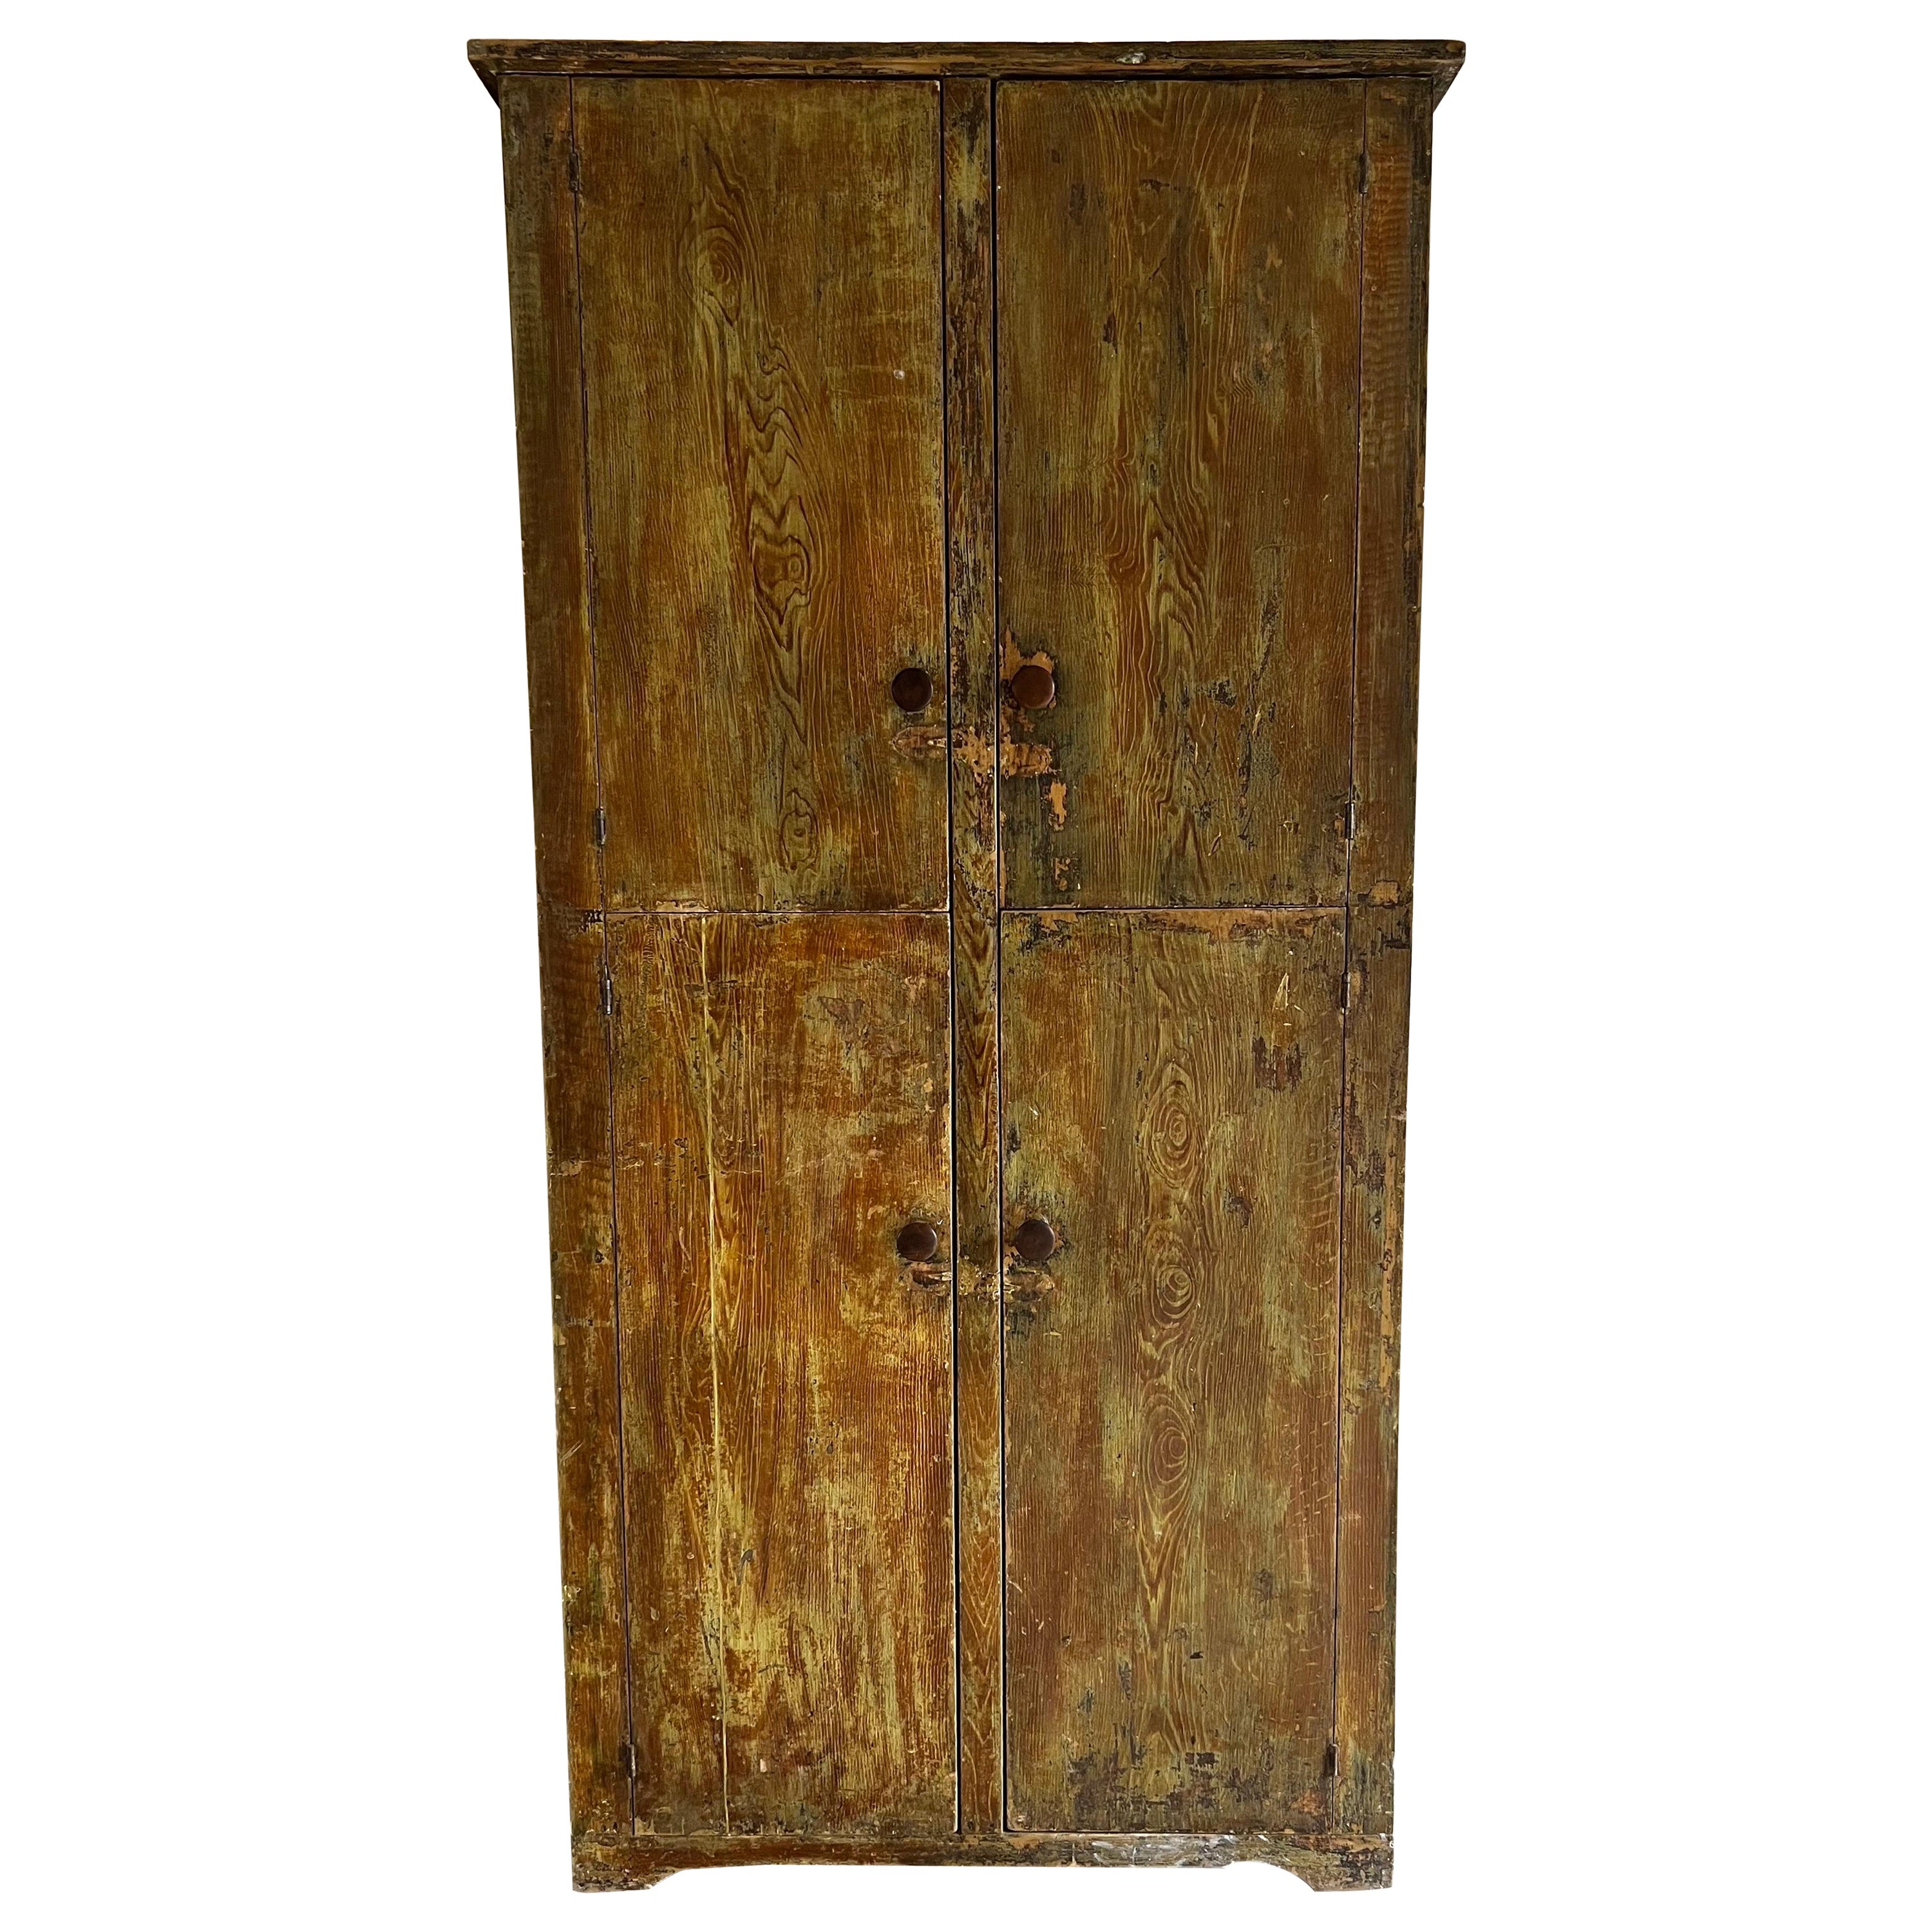 Early 20th Century American Painted Pine Pennsylvania Cupboard / Cabinet For Sale